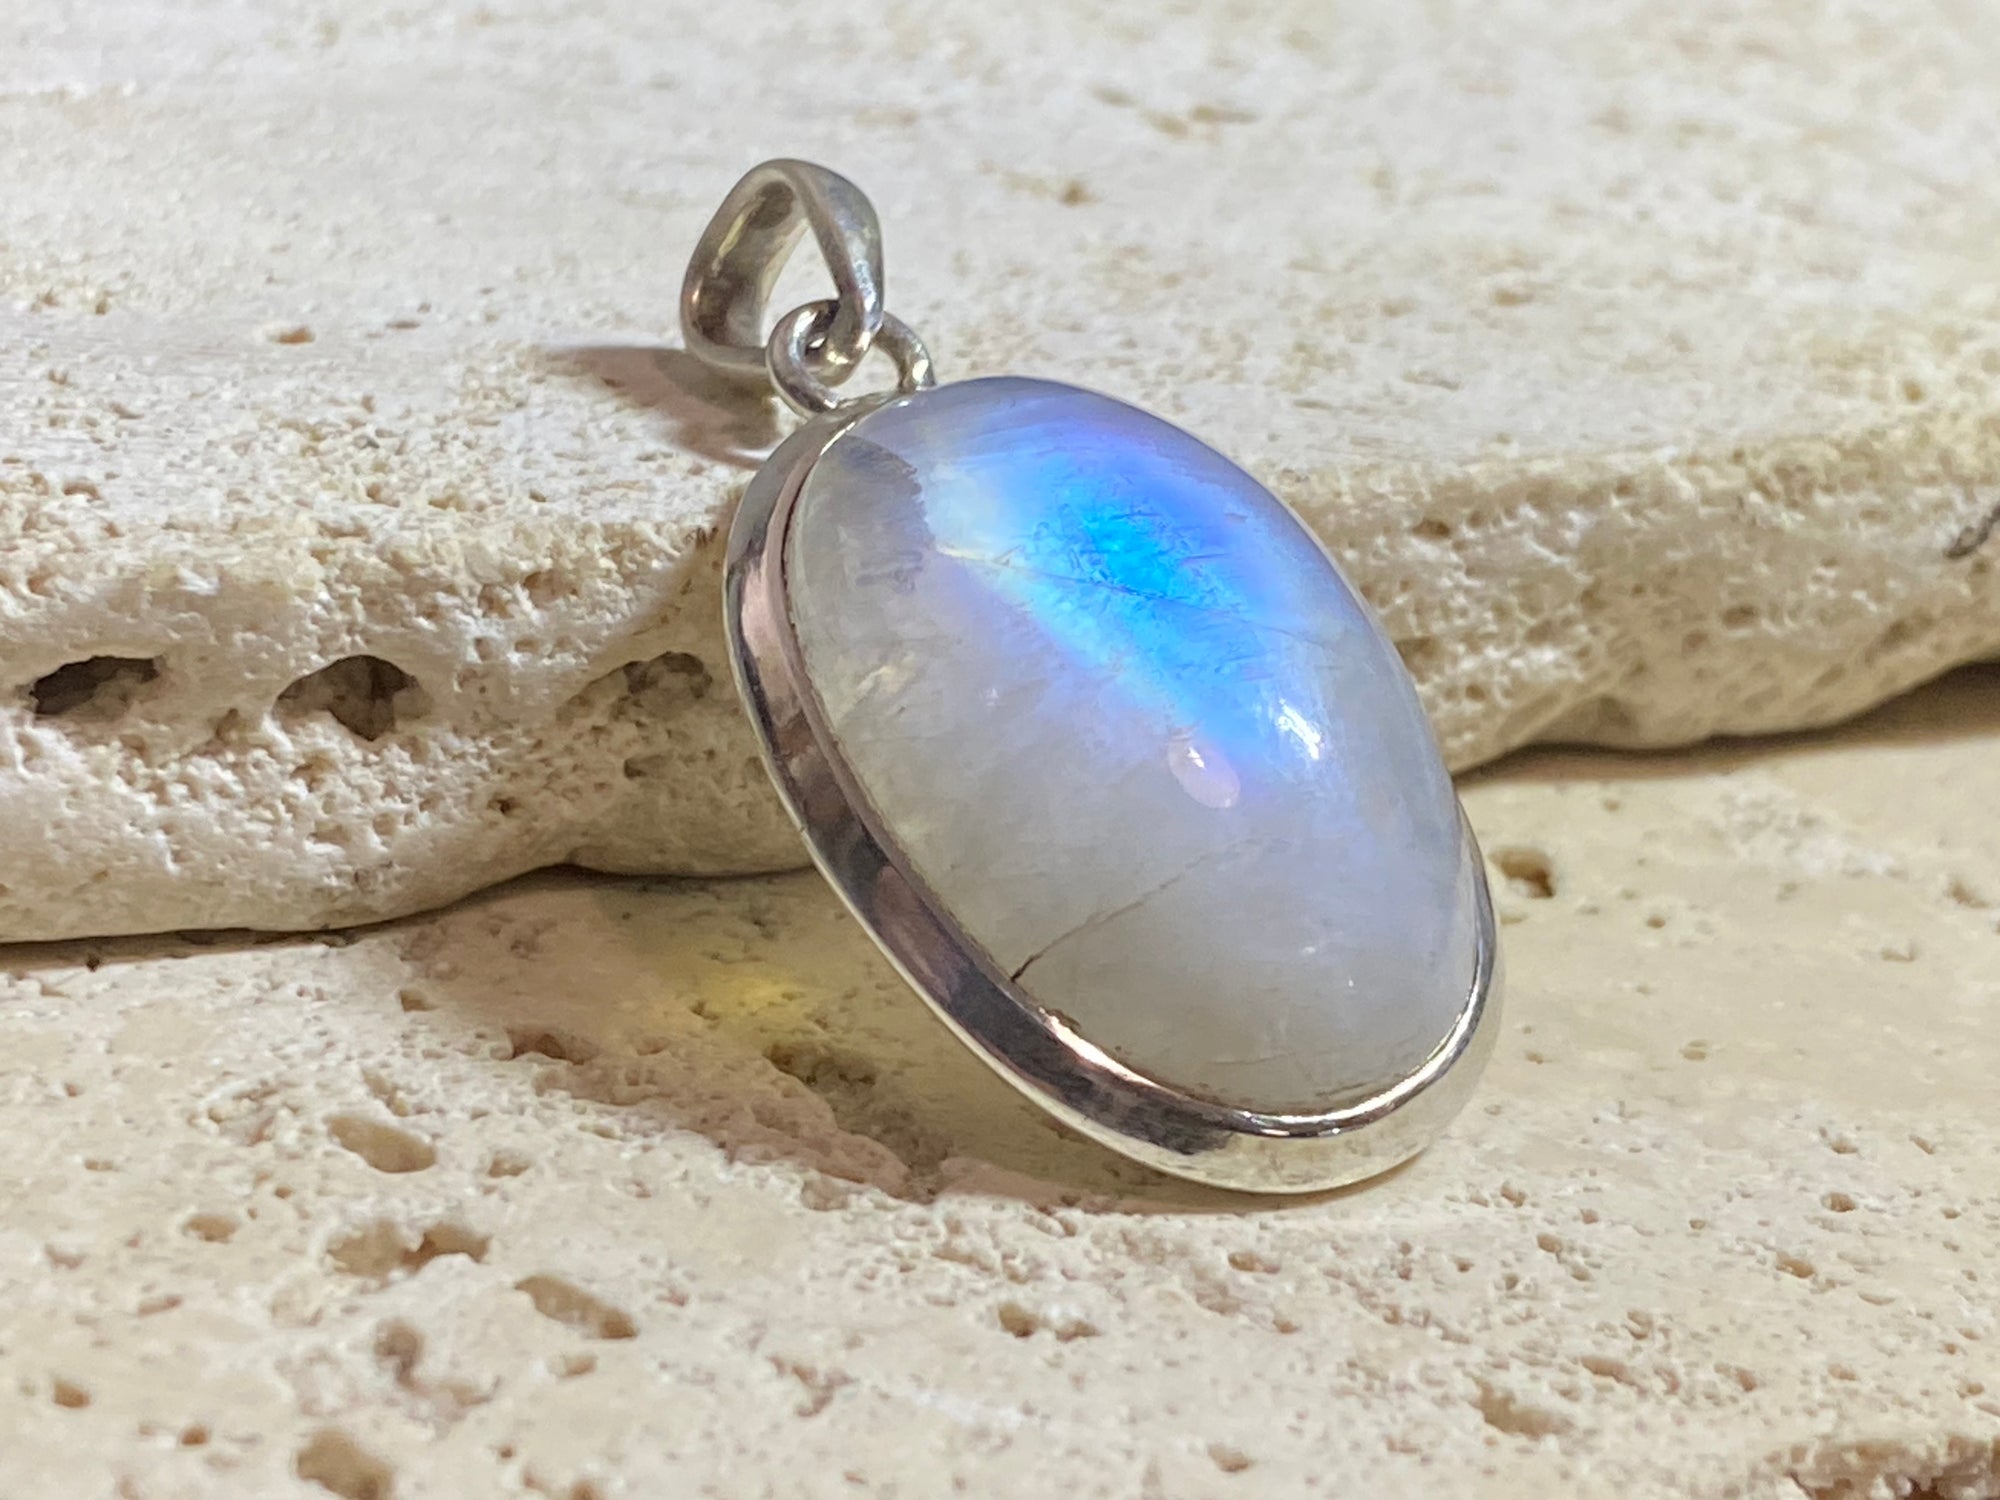 Oval high cut rainbow moonstone pendant set in sterling silver with a generous flexible bail to take a large chain or cord. A high quality stone with blue colour and fire. 